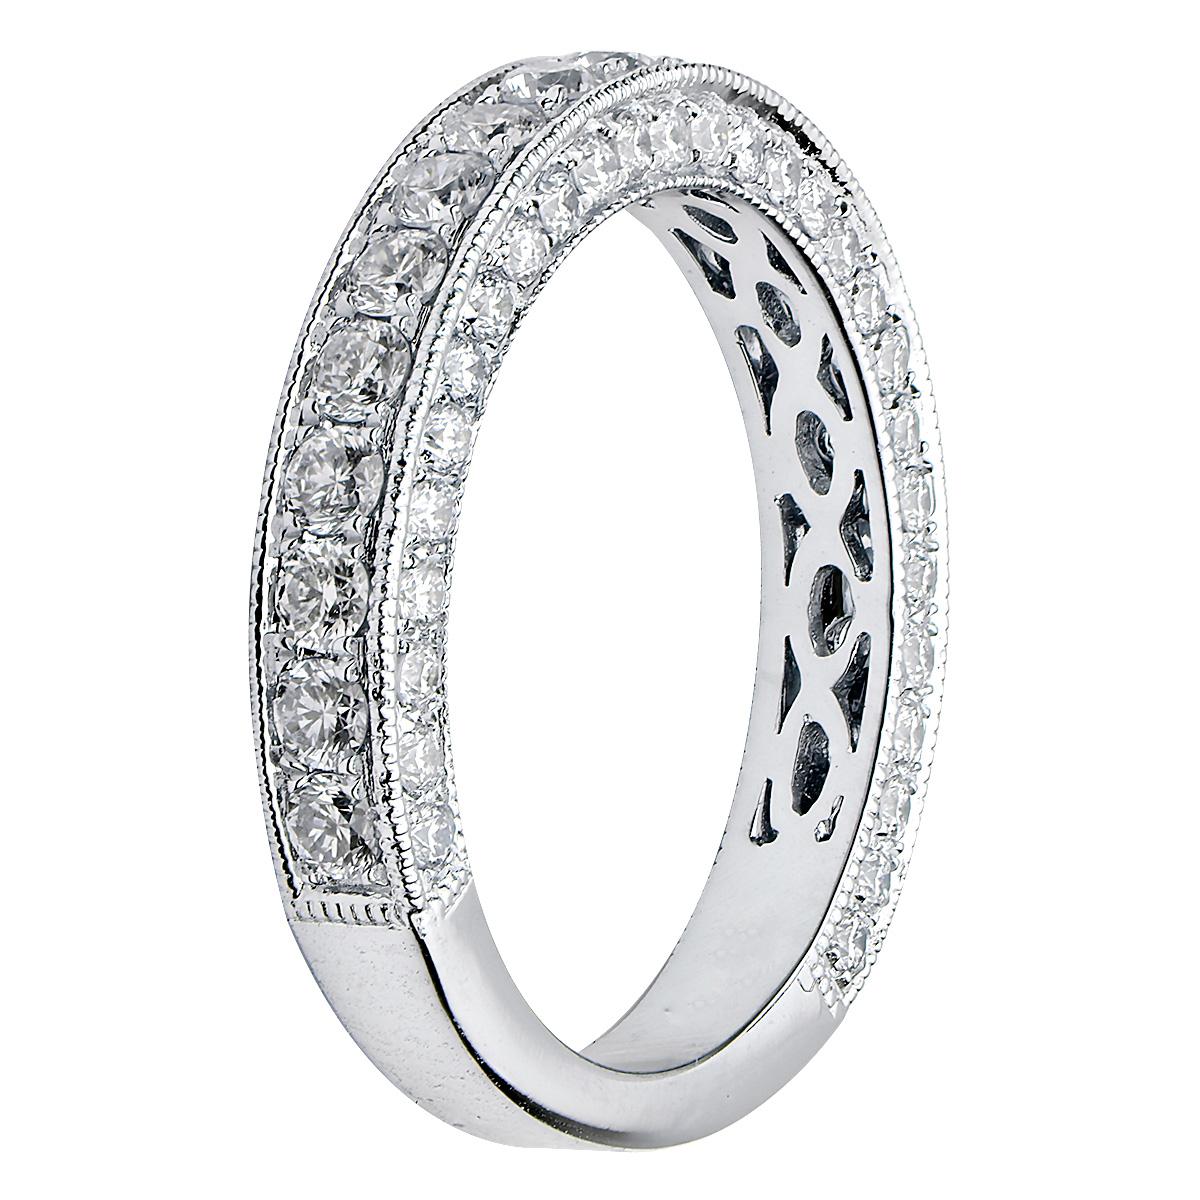 This beautiful band adds to a popular classic. There are 77 round VS2, G color diamonds totaling 1.07ct that are set 3/4 of the way around the band. The diamonds are channel set in the center as well as on the top and bottom to add sparkle from